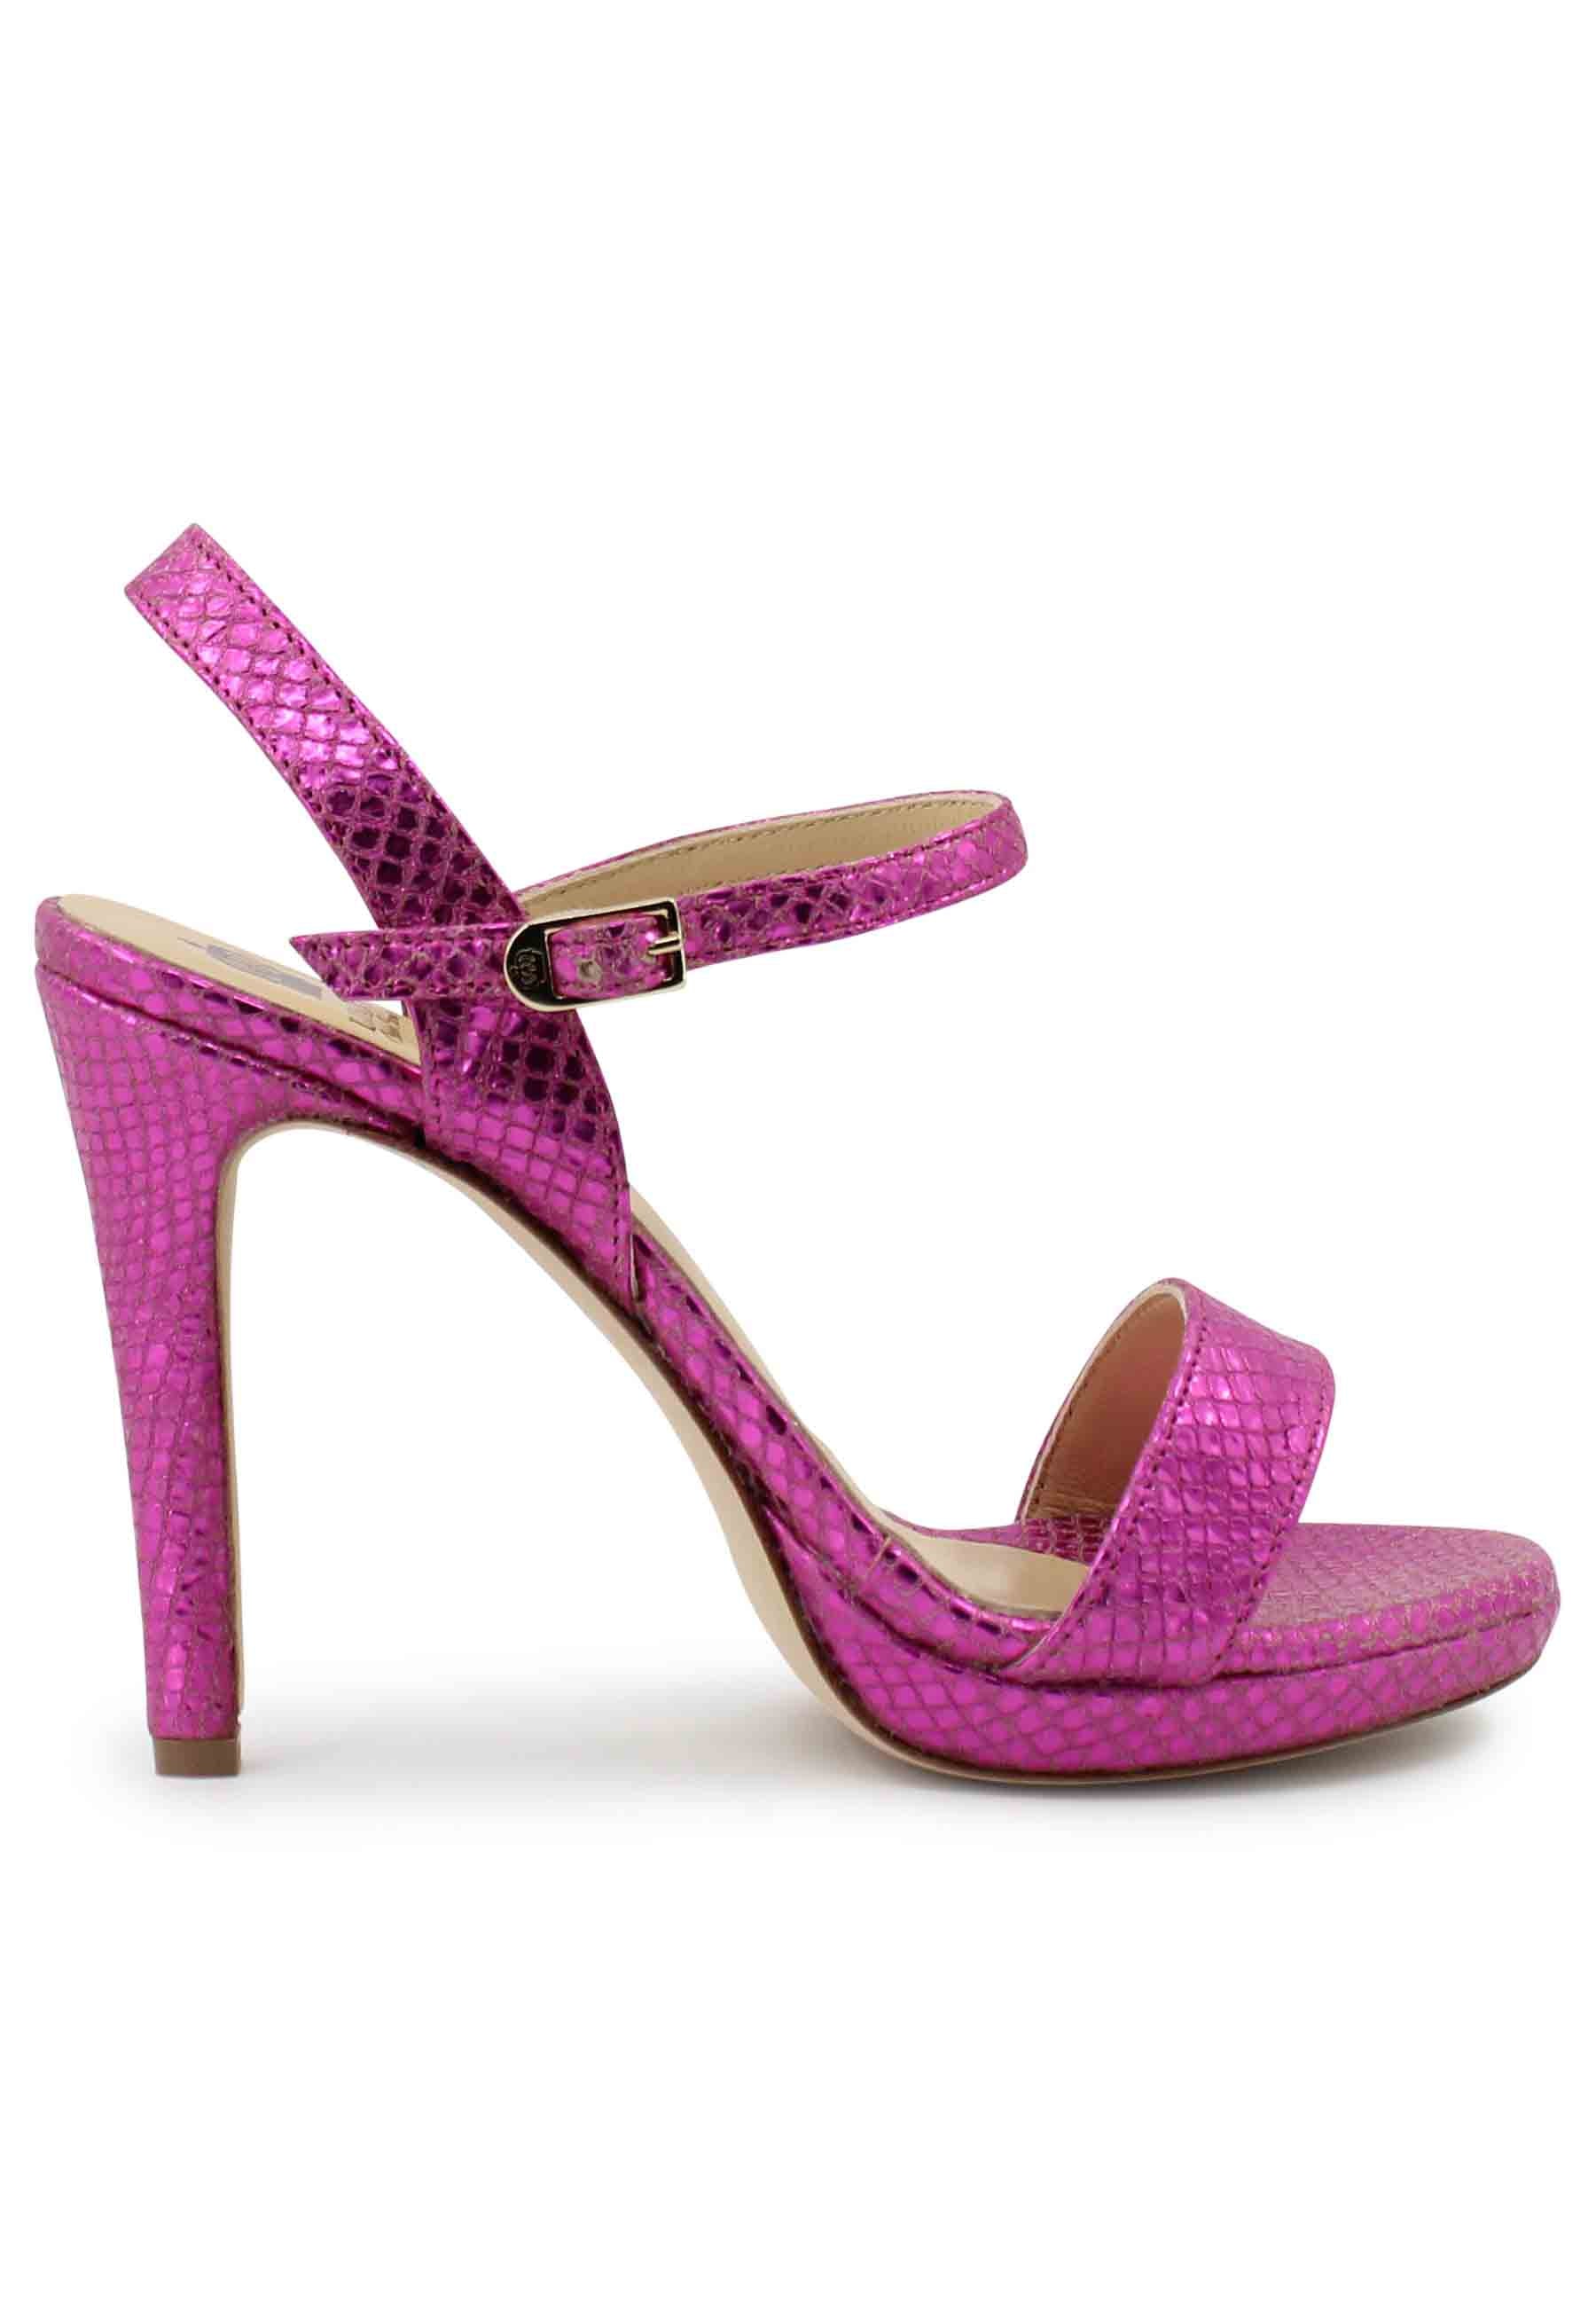 Women's sandals in snake-effect fuchsia laminated leather with high heel and ankle strap